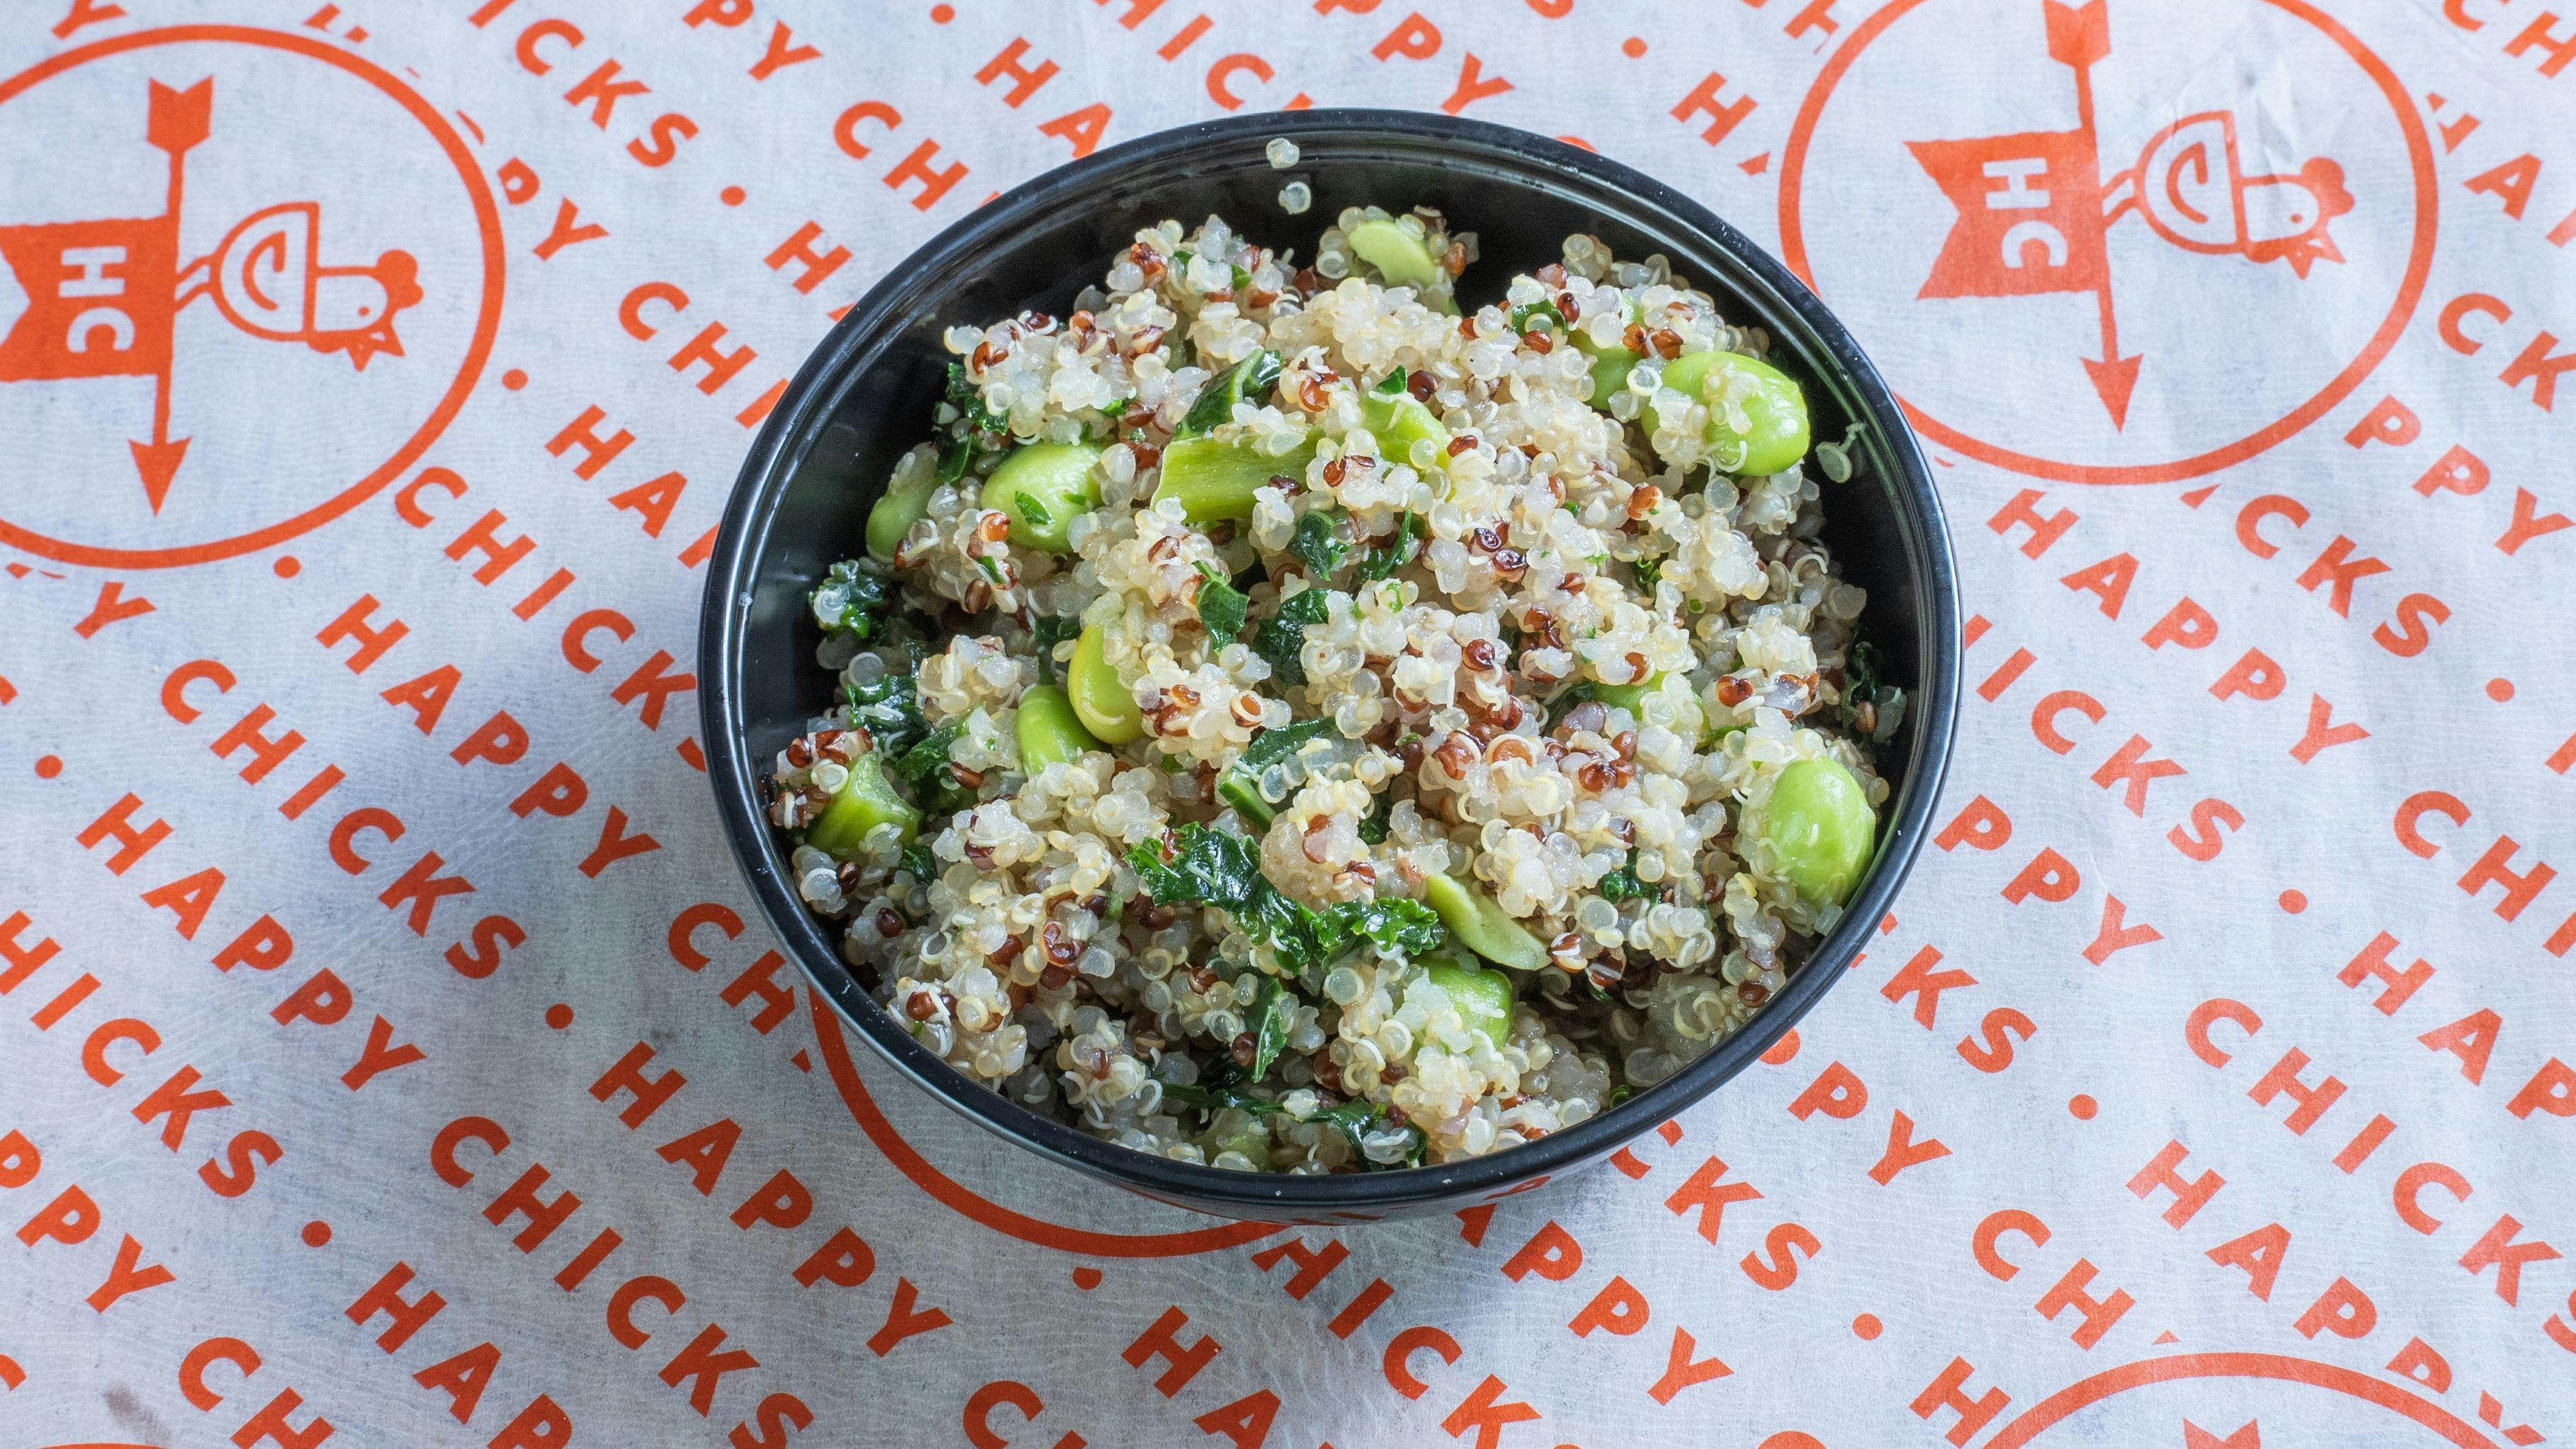 Quinoa Grain Salad side from Happy Chicks - East 6th St in Austin, TX